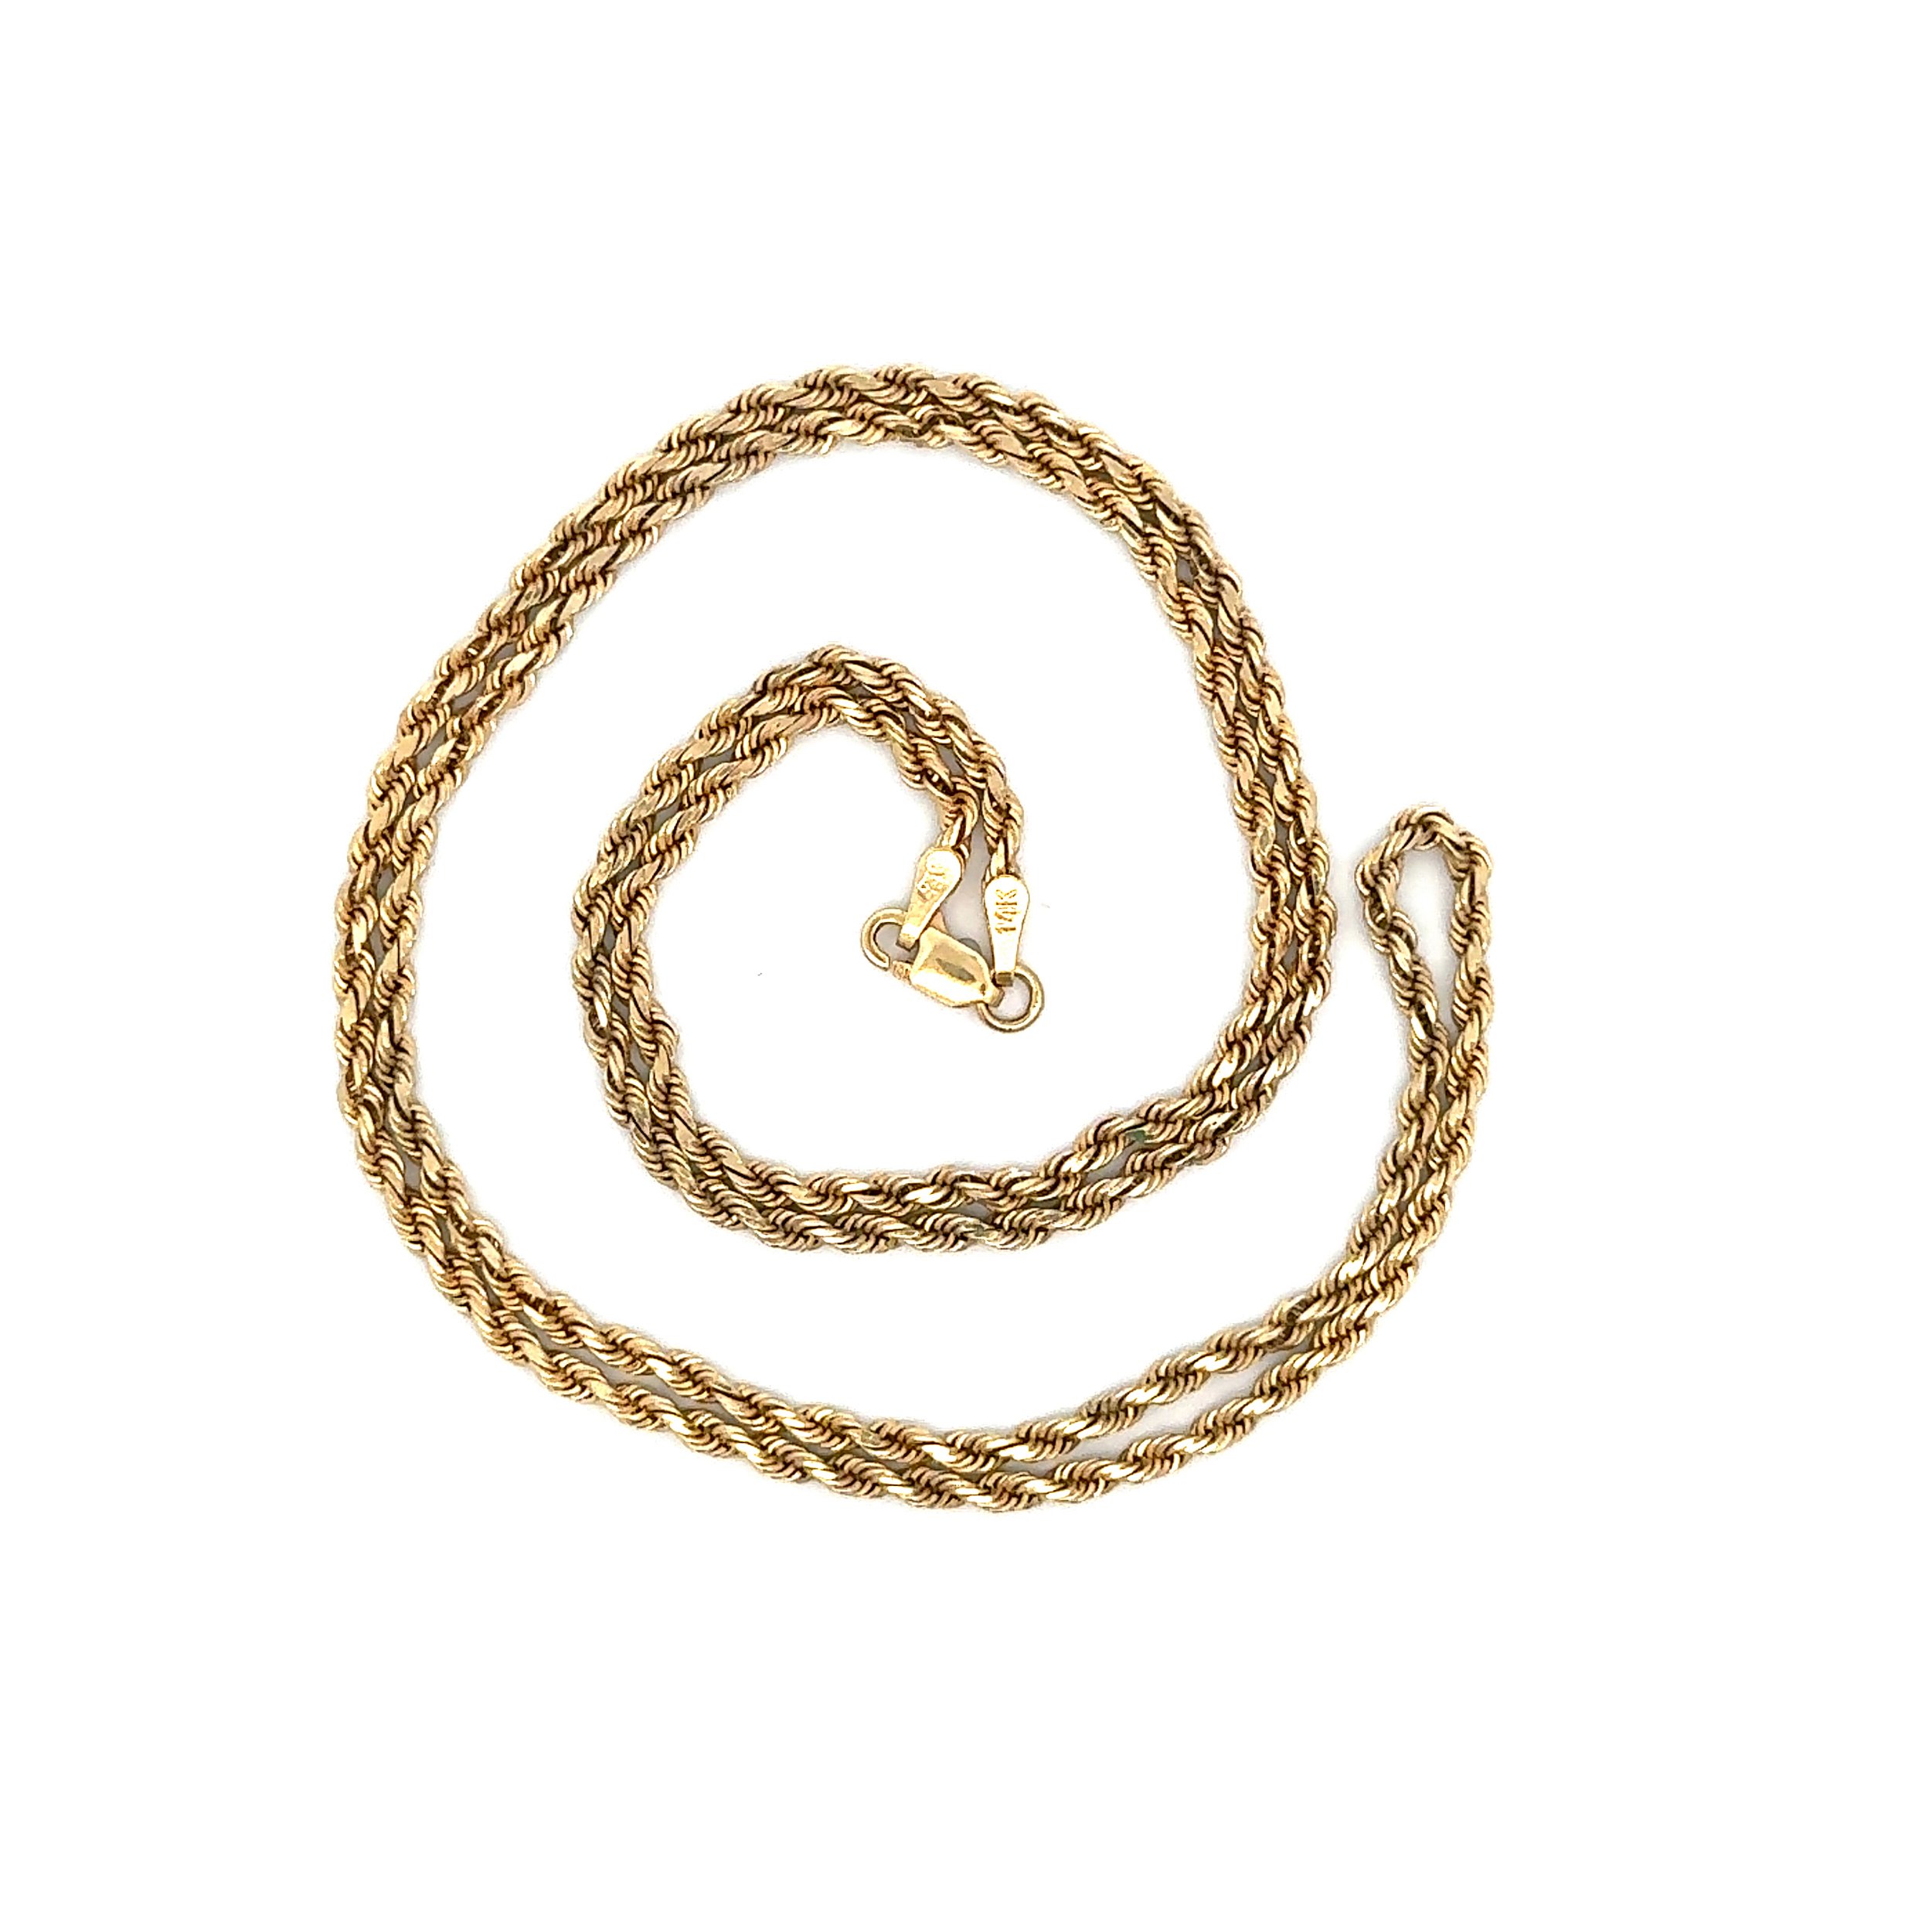 14K YG 2.4mm Twisted Rope Chain Necklace 10.2g, 22"